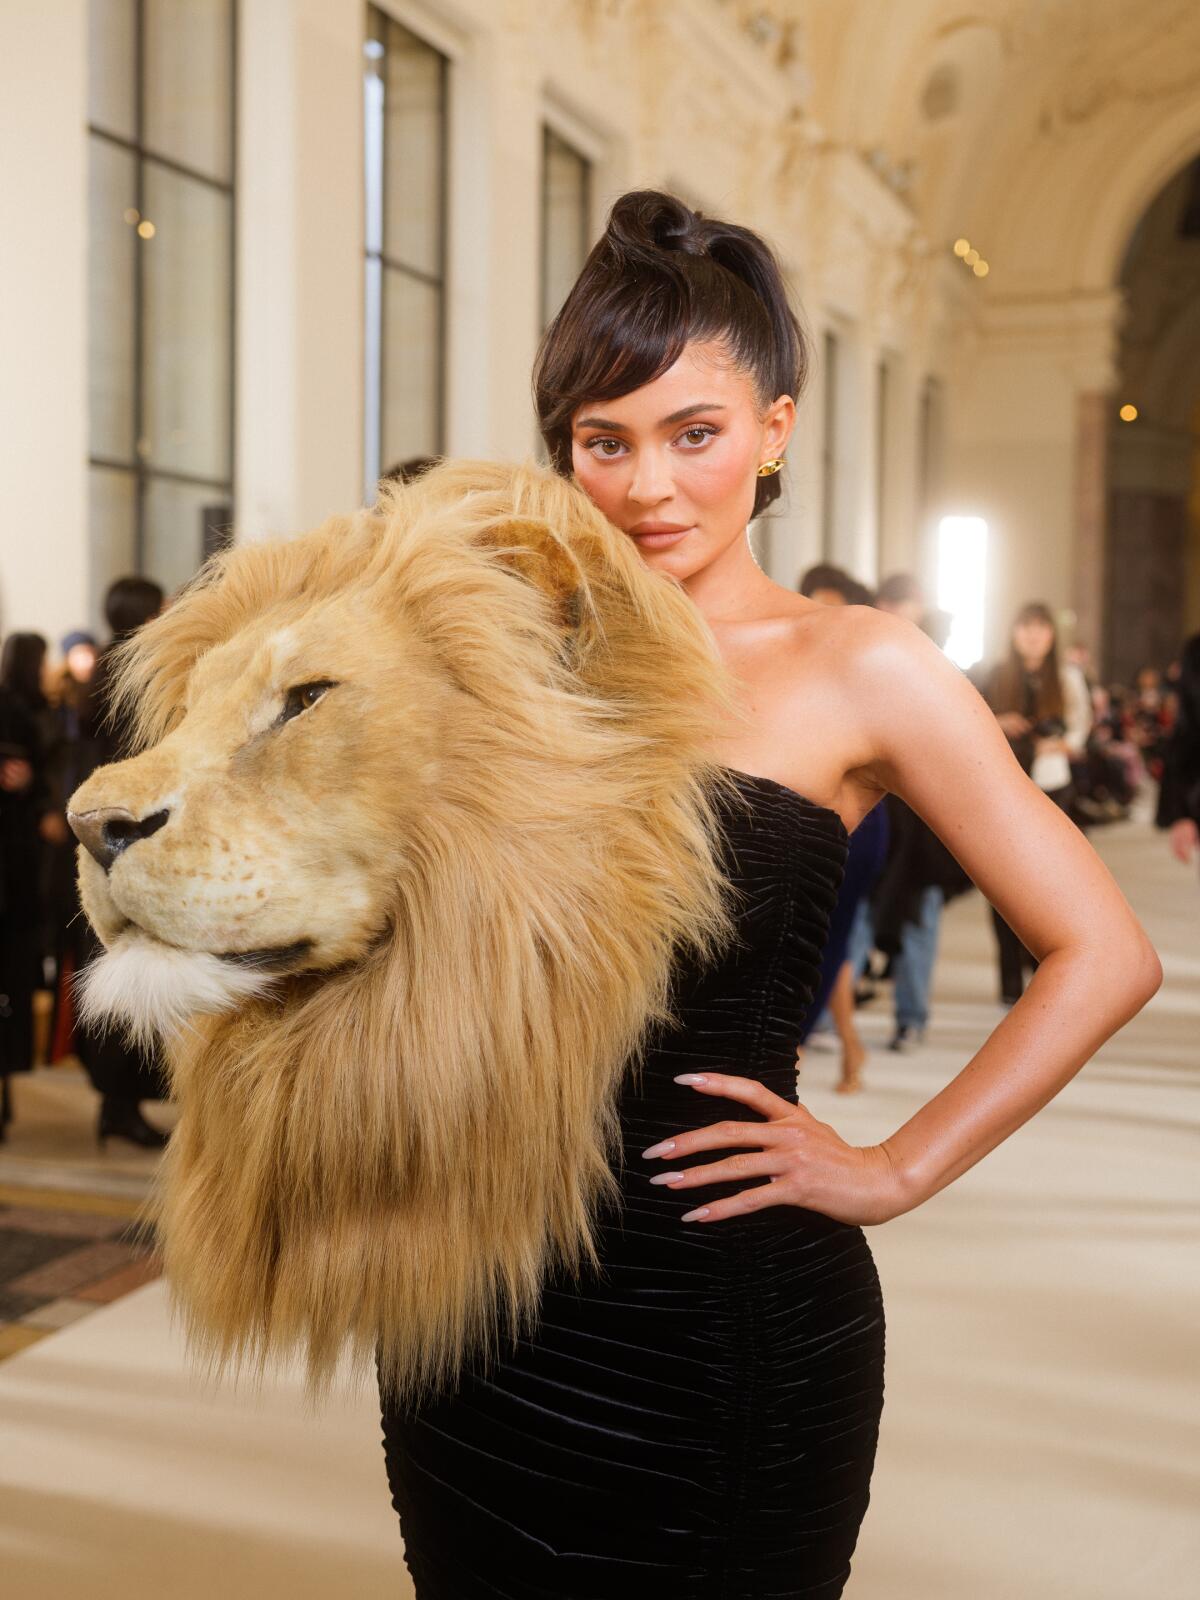 Kylie Jenner's lion's head dress: Everything you need to know